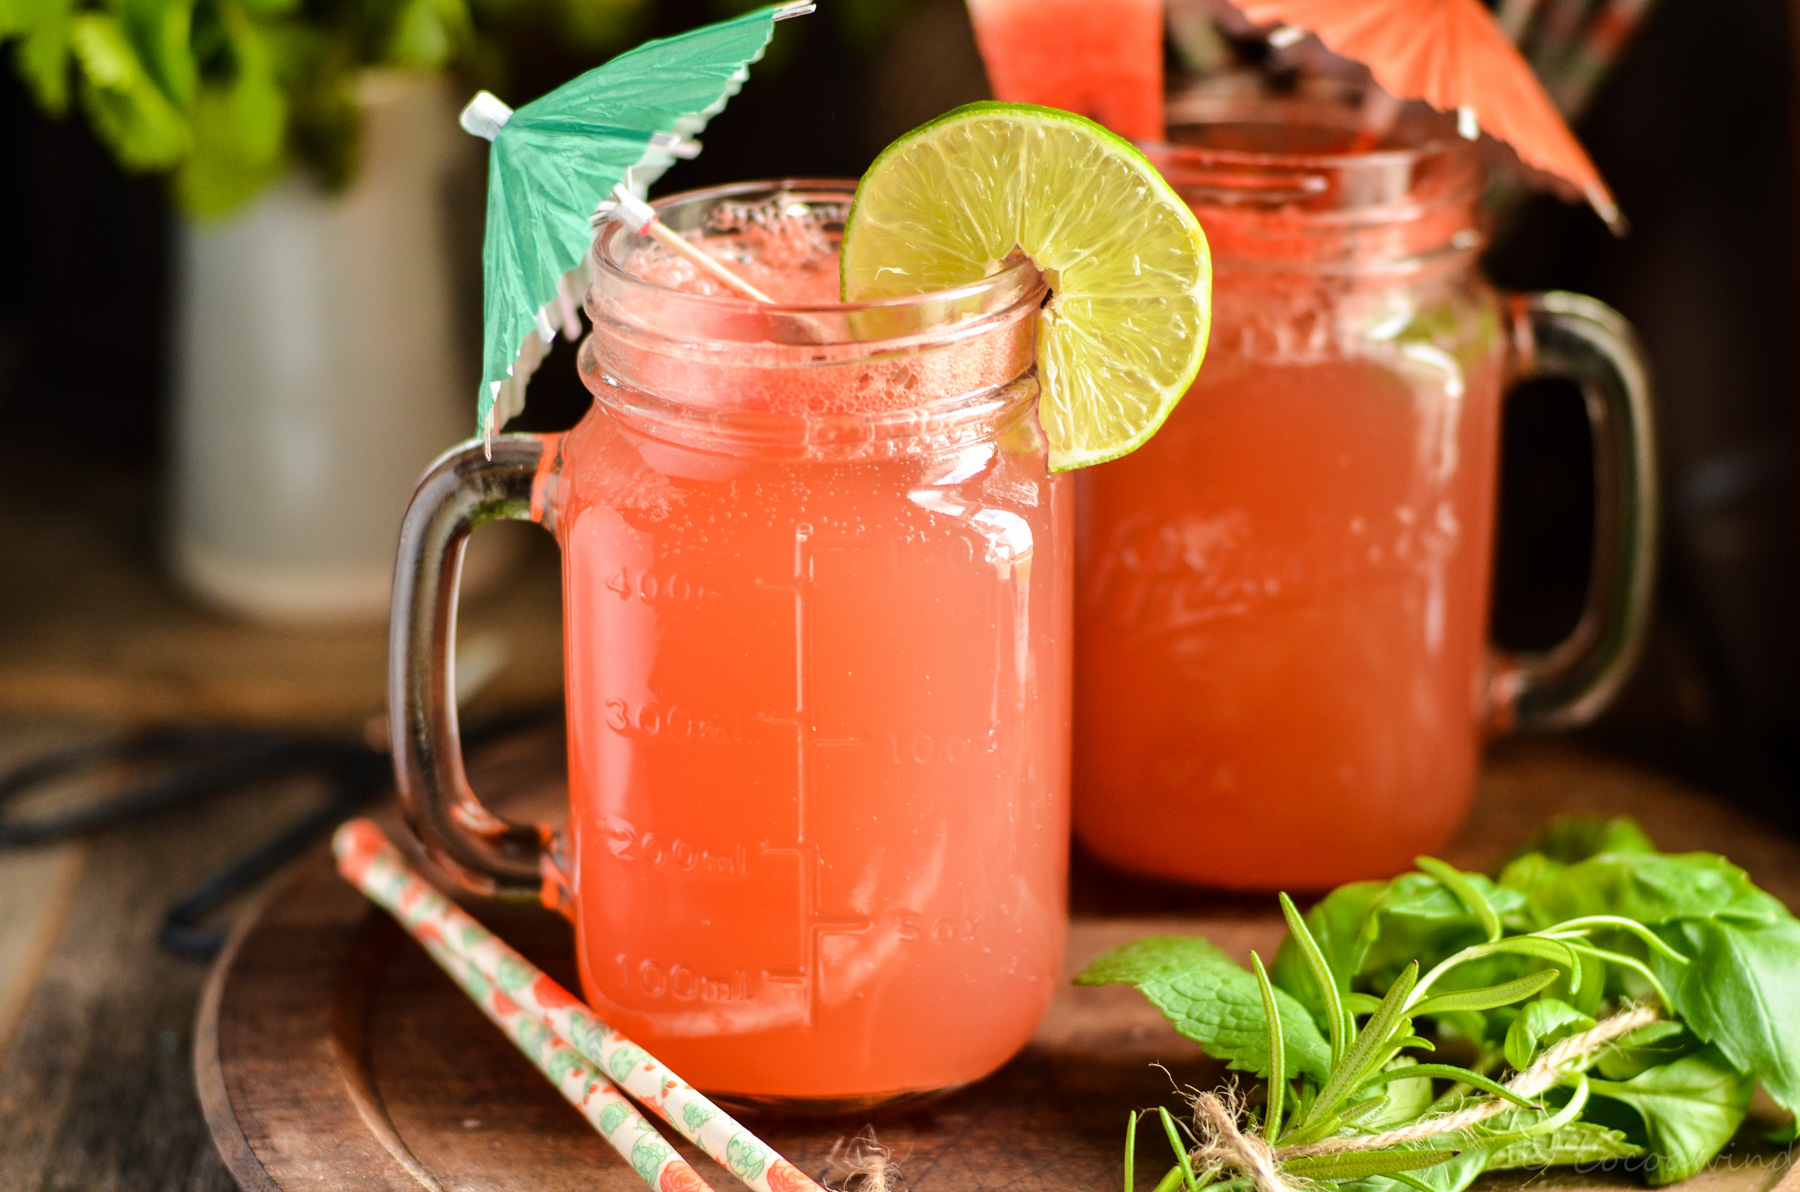 Watermelon Lime Soda - Summer Cooler to beat the heat